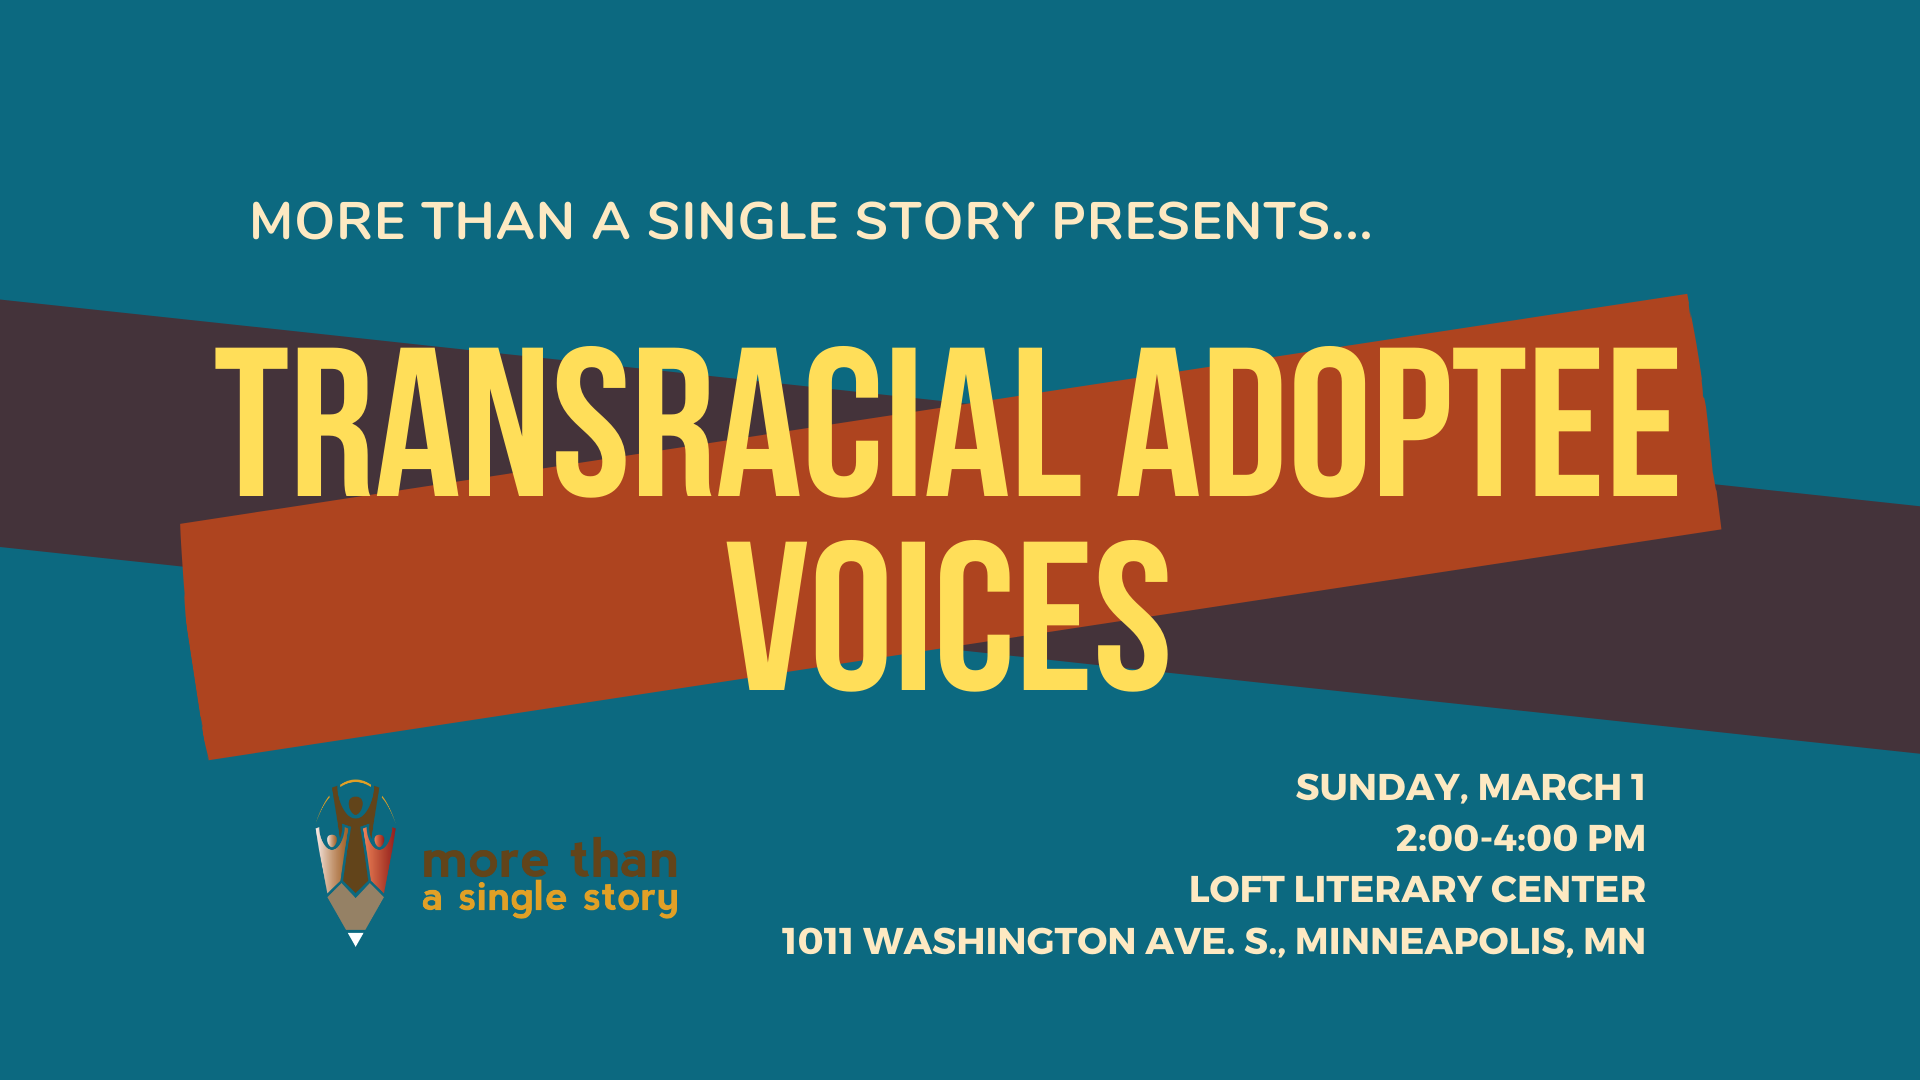 MTSS: Transracial Adoptee Voices